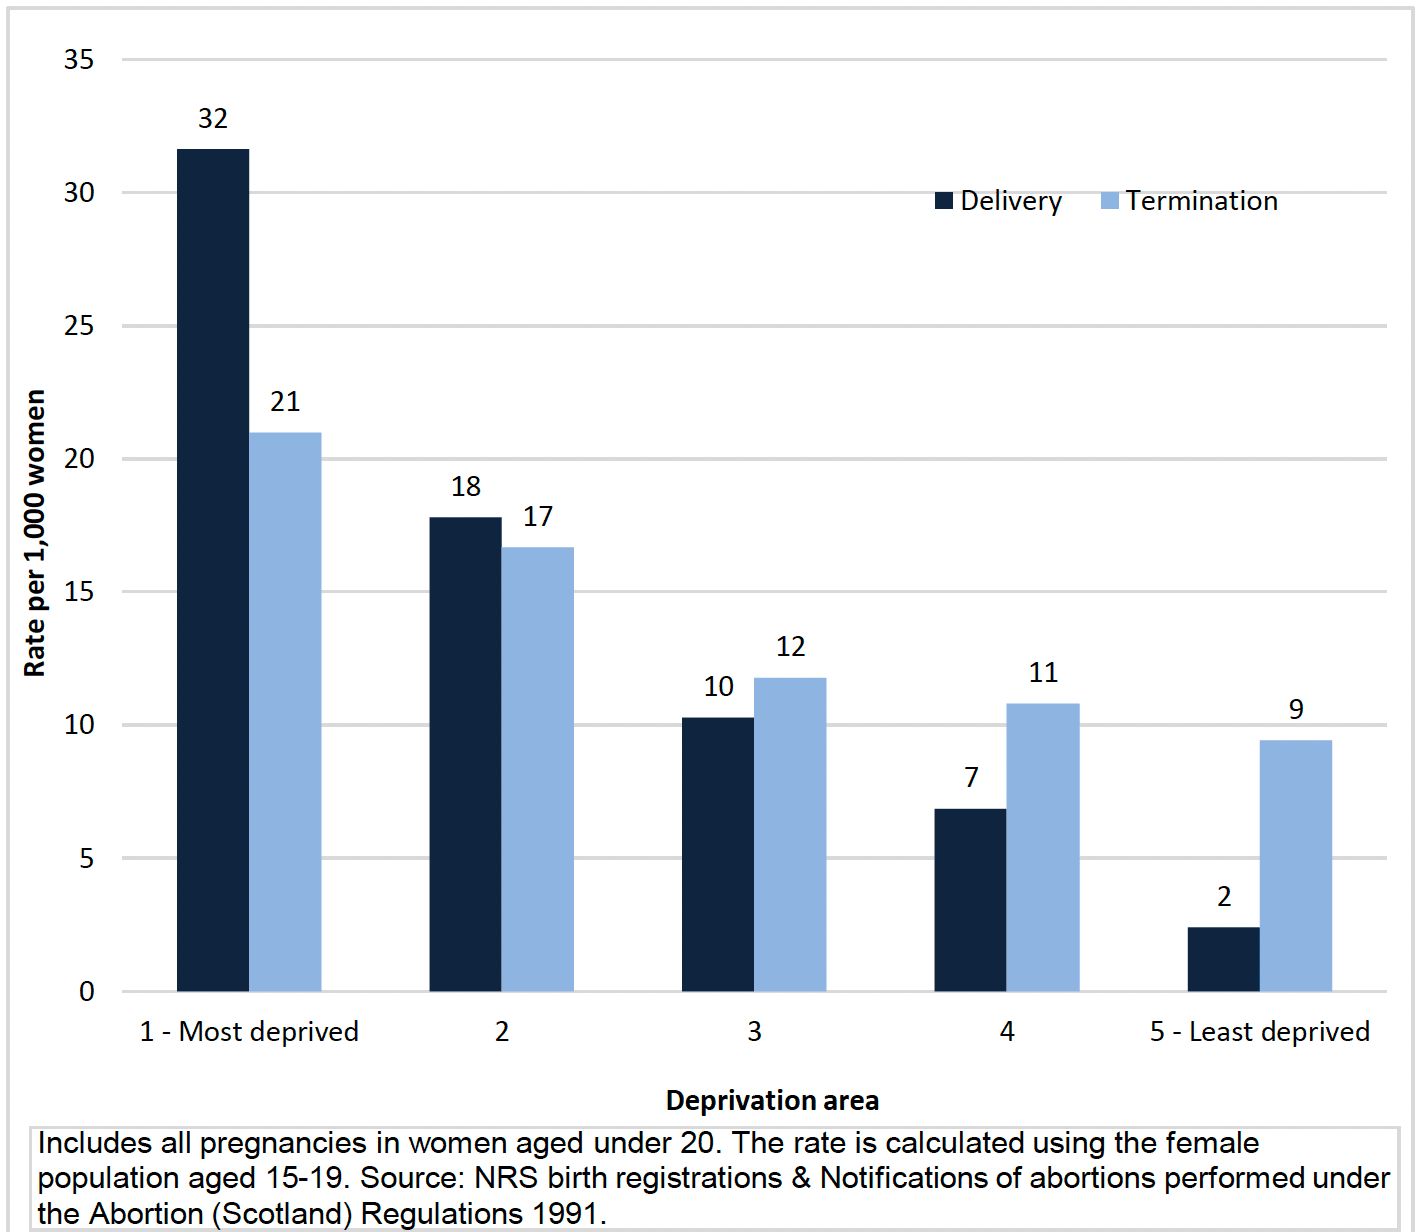 Chart 3 is a bar chart showing the rate of teenage pregnancies for conceptions occurring in 2019 in Scotland, by SIMD and whether the pregnancy resulted in delivery or termination. Young women in the most deprived areas were more likely to have a pregnancy overall and those who had a pregnancy in the most deprived areas were more likely to result in delivery of the baby.